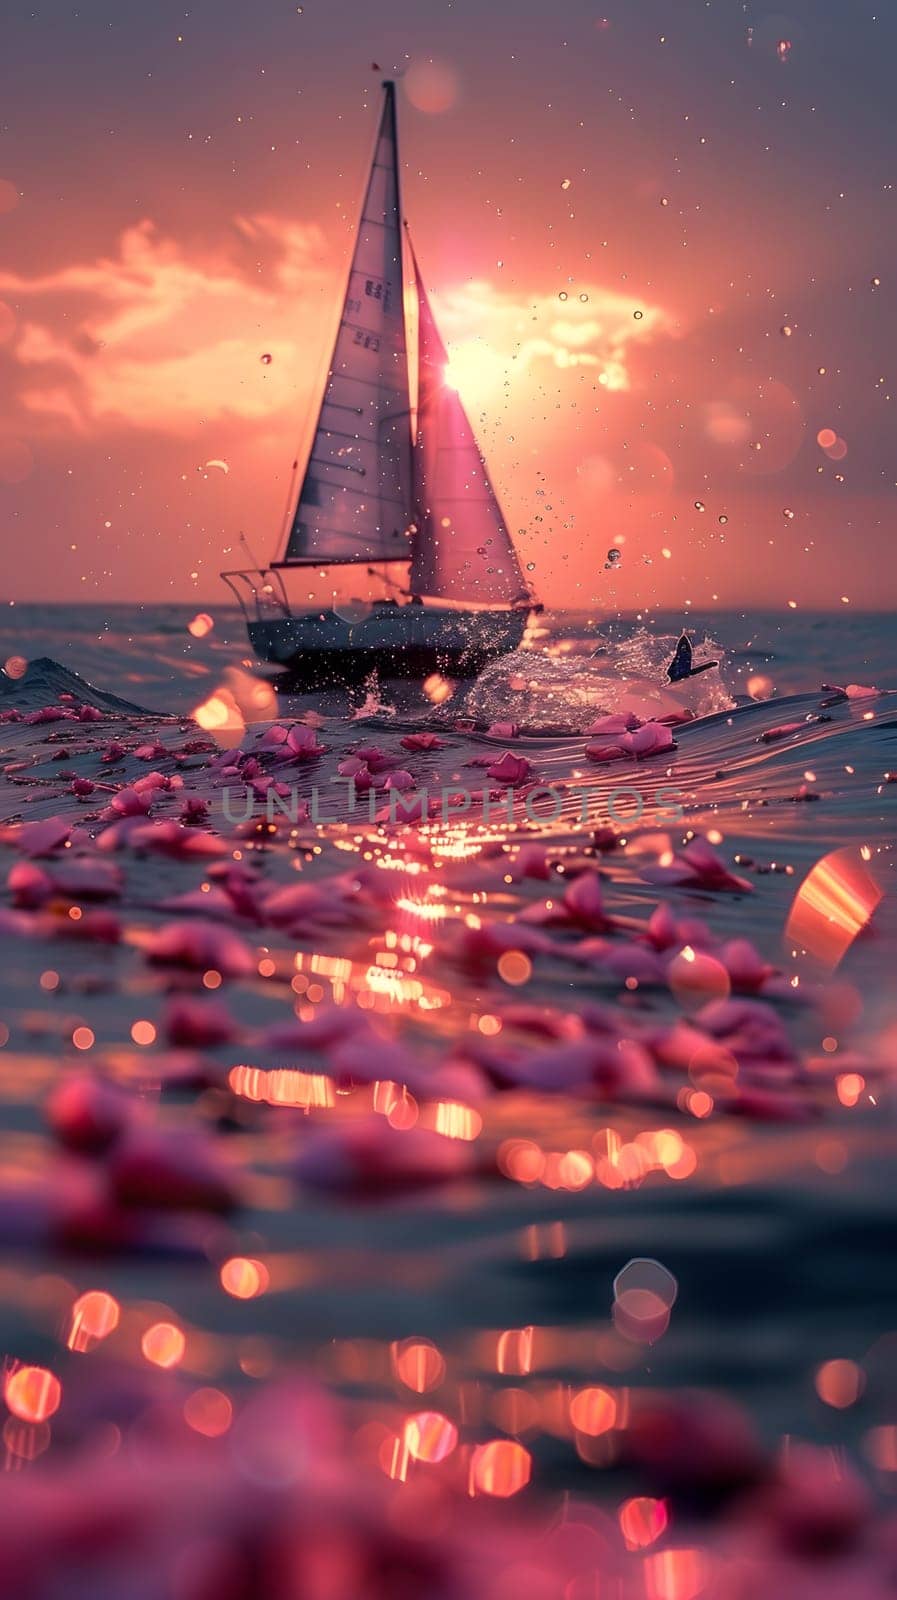 A sailboat peacefully floats on the water as the sun sets, creating a stunning red sky at dusk with clouds in the afterglow